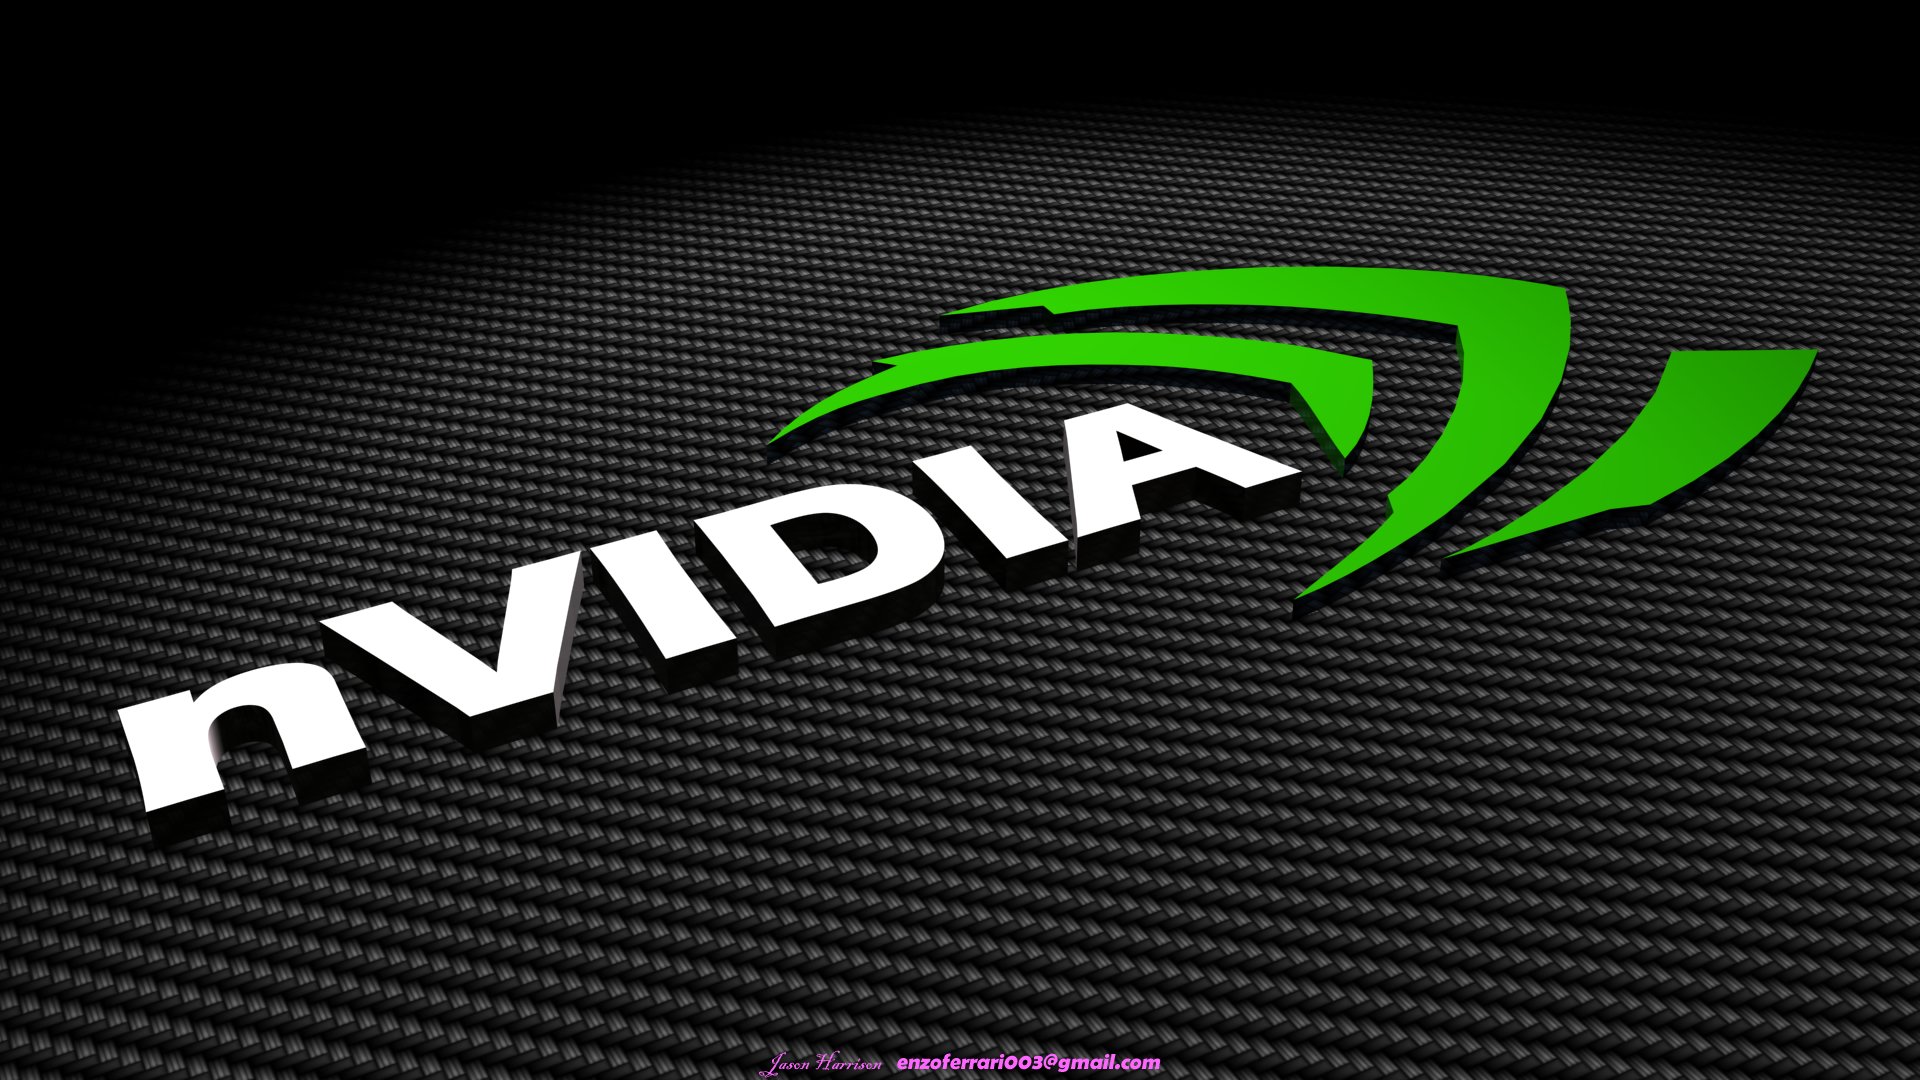 Our New Gallery Of Wallpaper HD Nvidia To